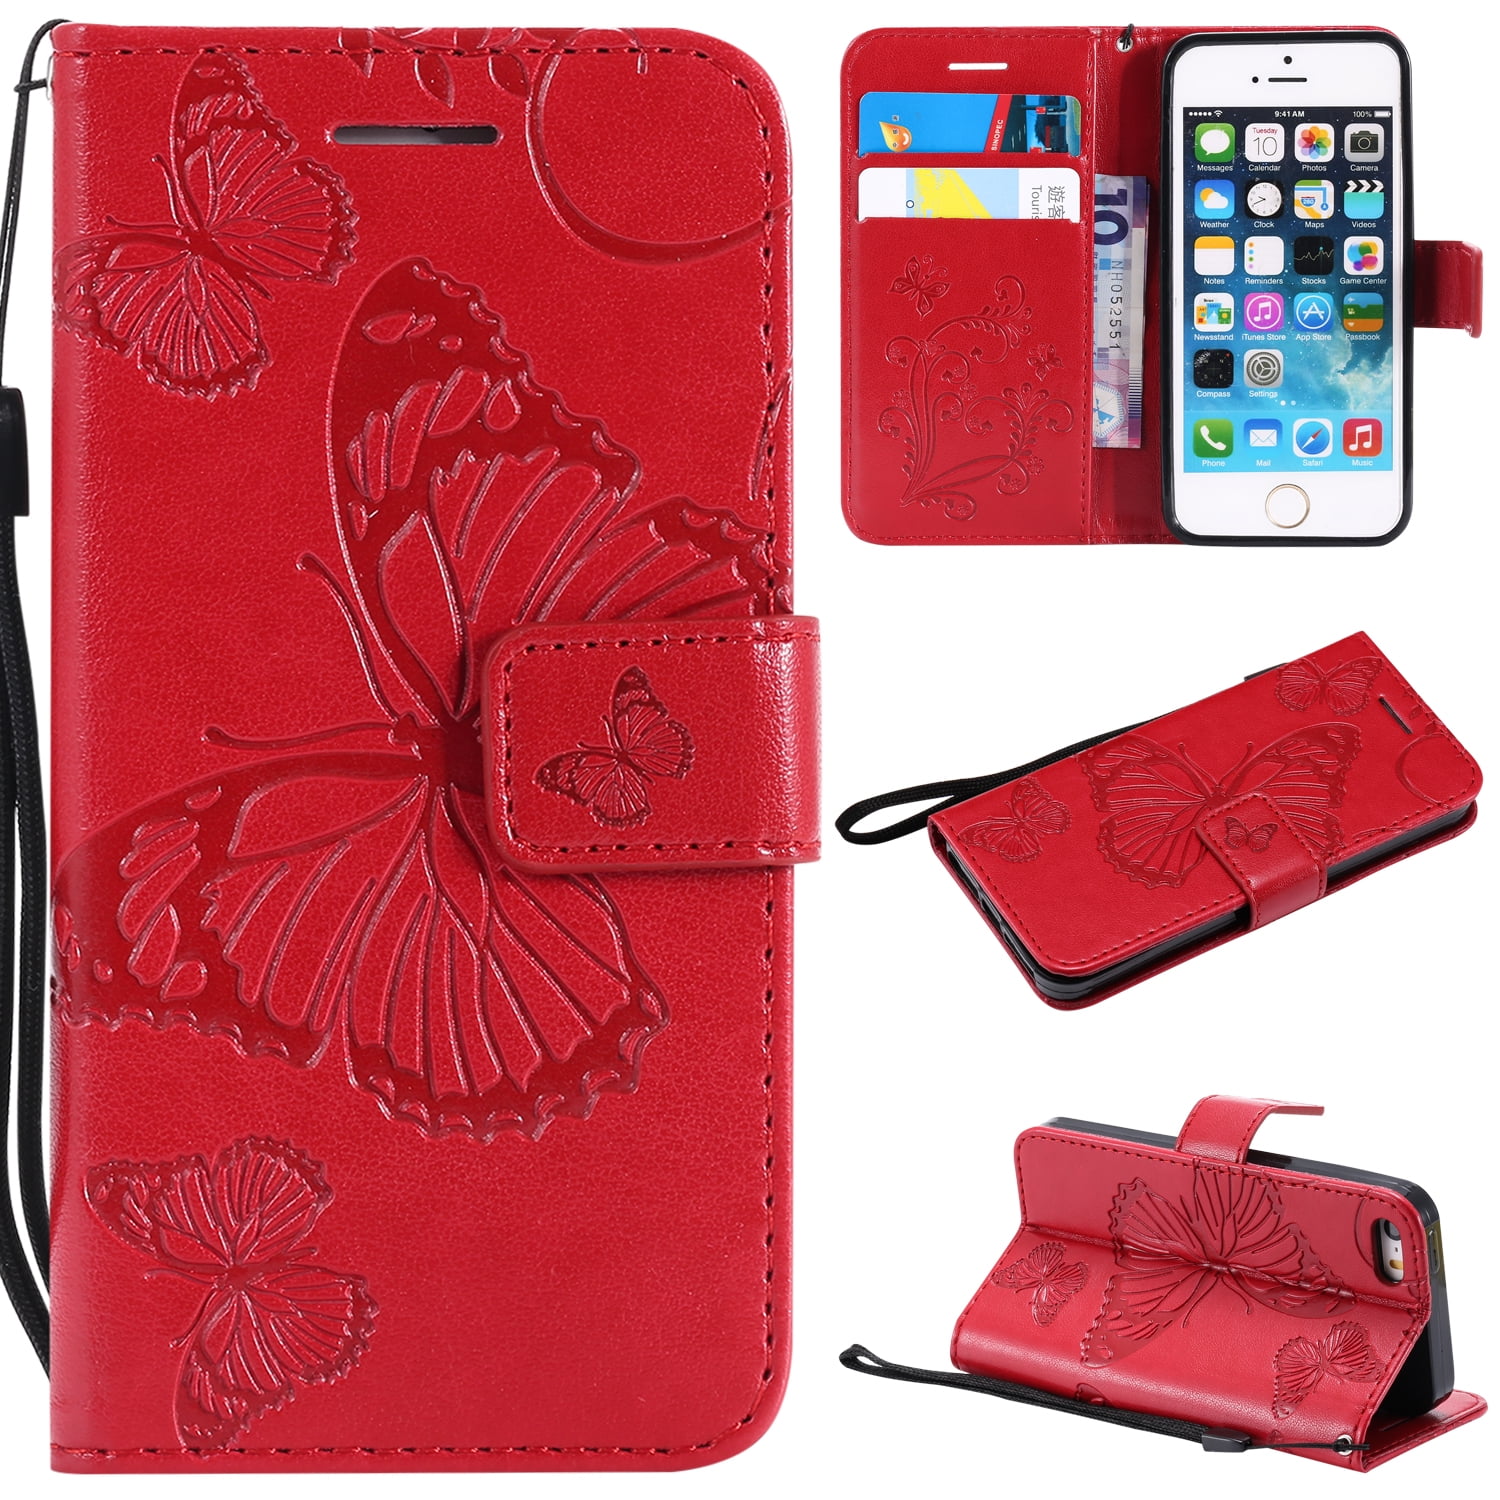 iPhone 5S Case,iPhone 5 Case,iPhone Wallet case, Allytech Pretty Retro Embossed Butterfly Flower Design Pu Leather Book Style Wallet Flip Case Cover for Apple iPhone 5/ 5S /SE(2016）, Red Walmart.com